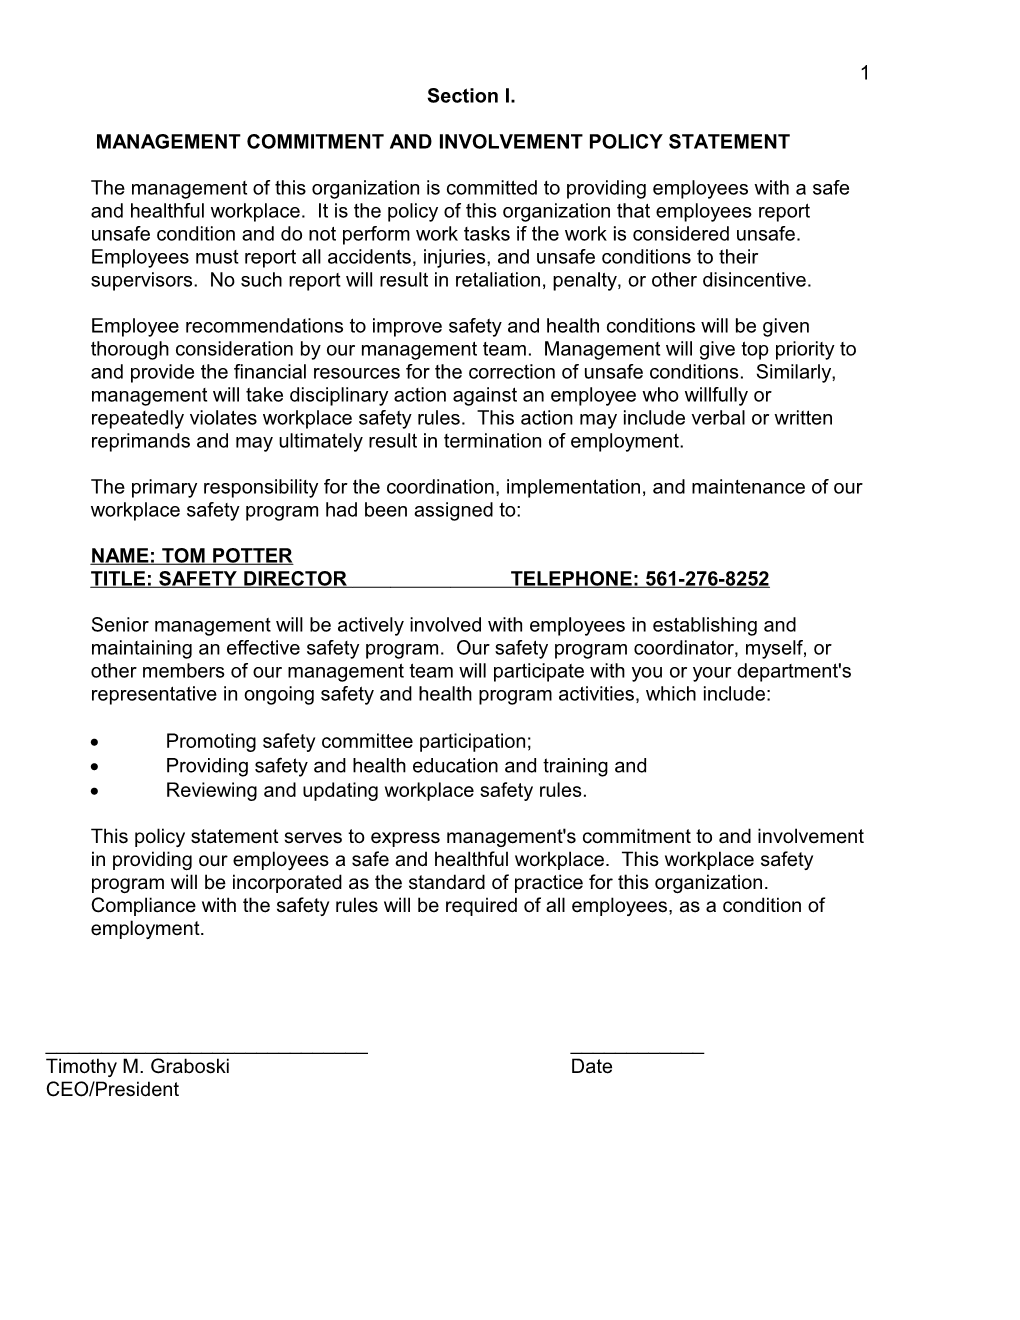 Management Commitment and Involvement Policy Statement